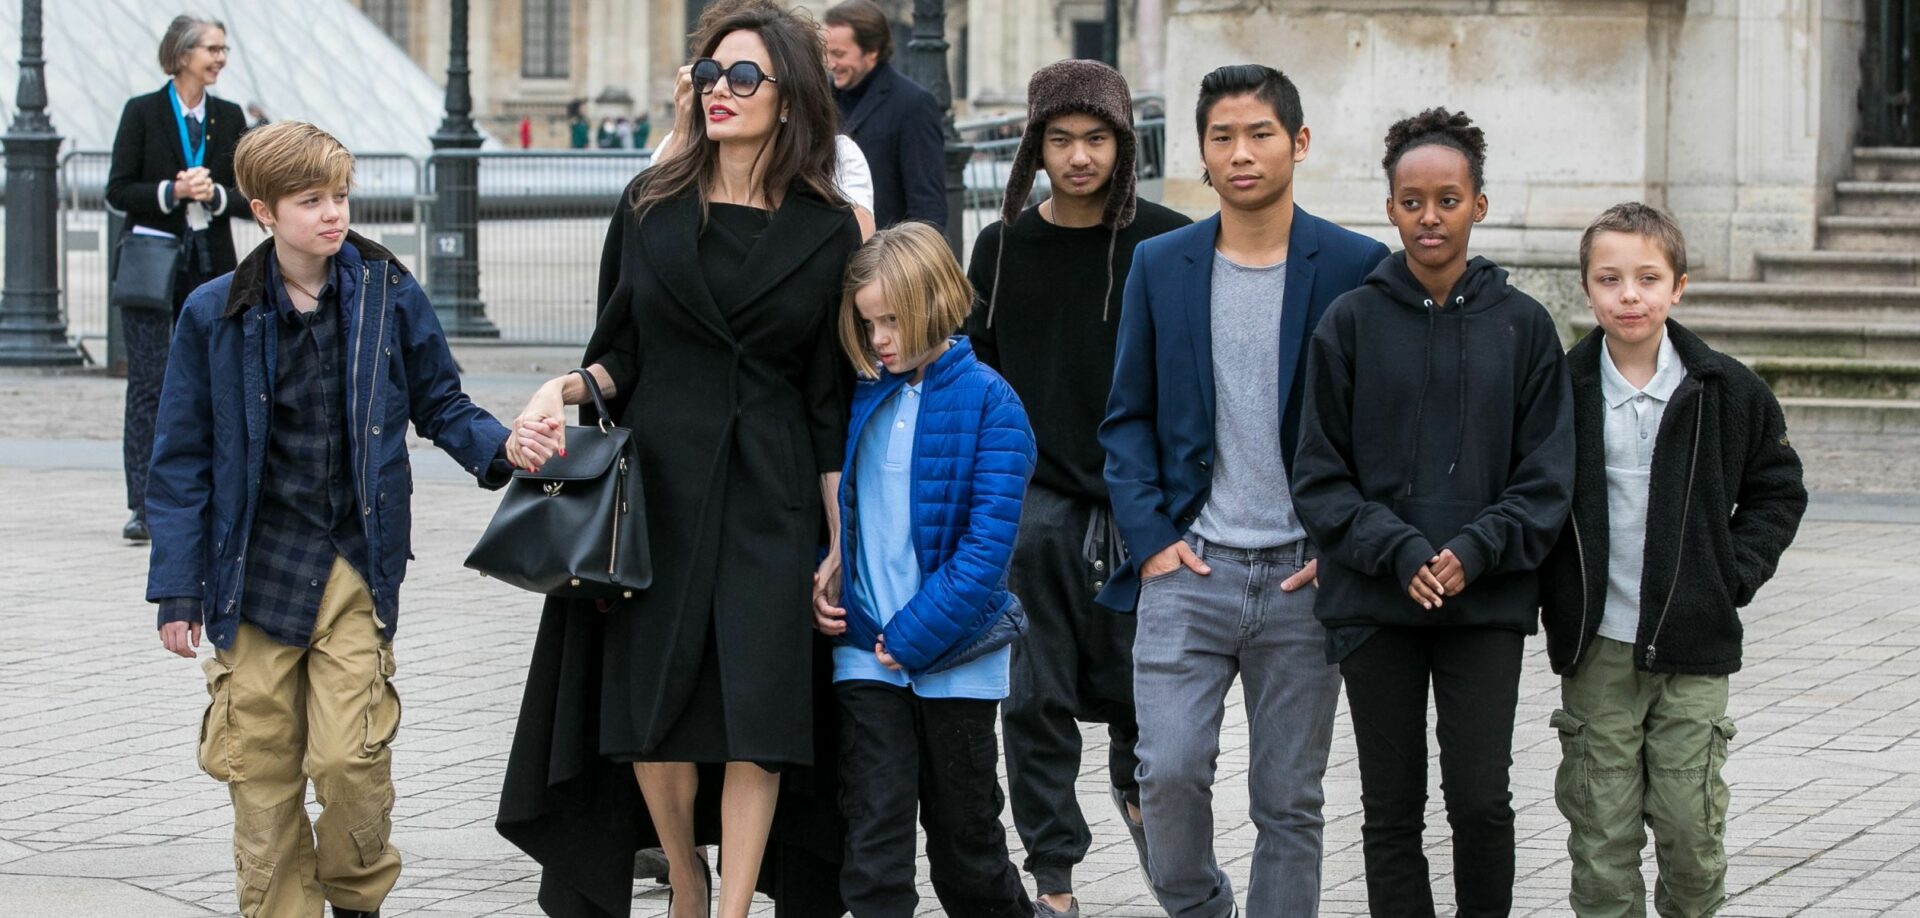  Angelina Jolie et son fils Maddox @ Getty Images